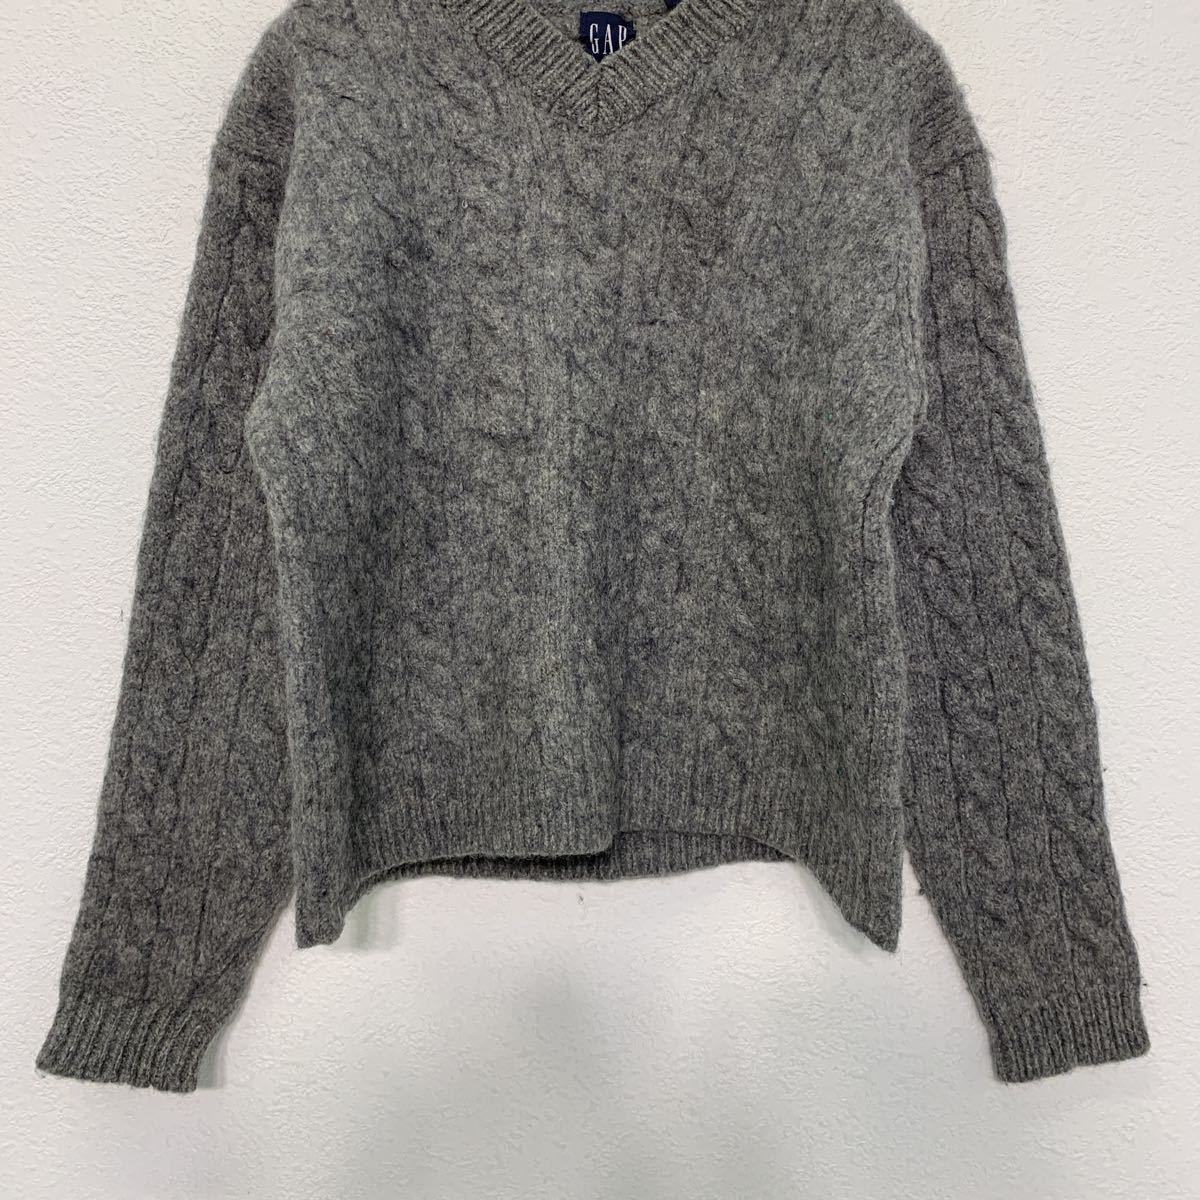 GAP knitted sweater M gray Gap wool old clothes . America buying up a510-5700